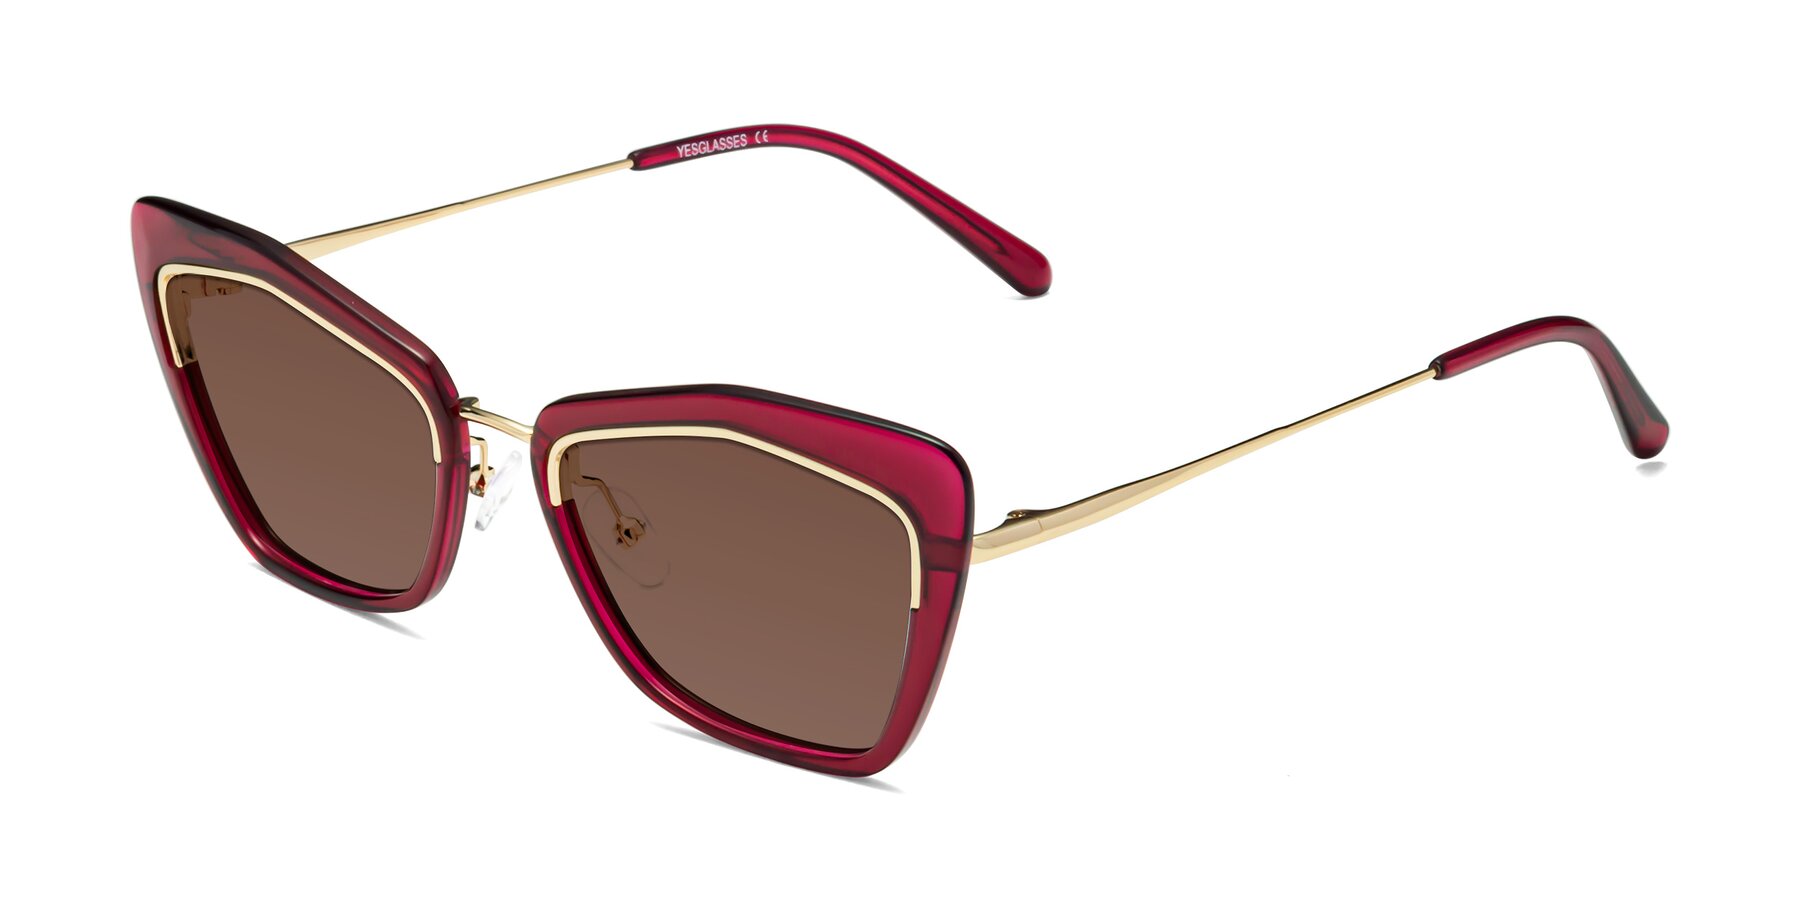 Angle of Lasso in Wine with Brown Tinted Lenses